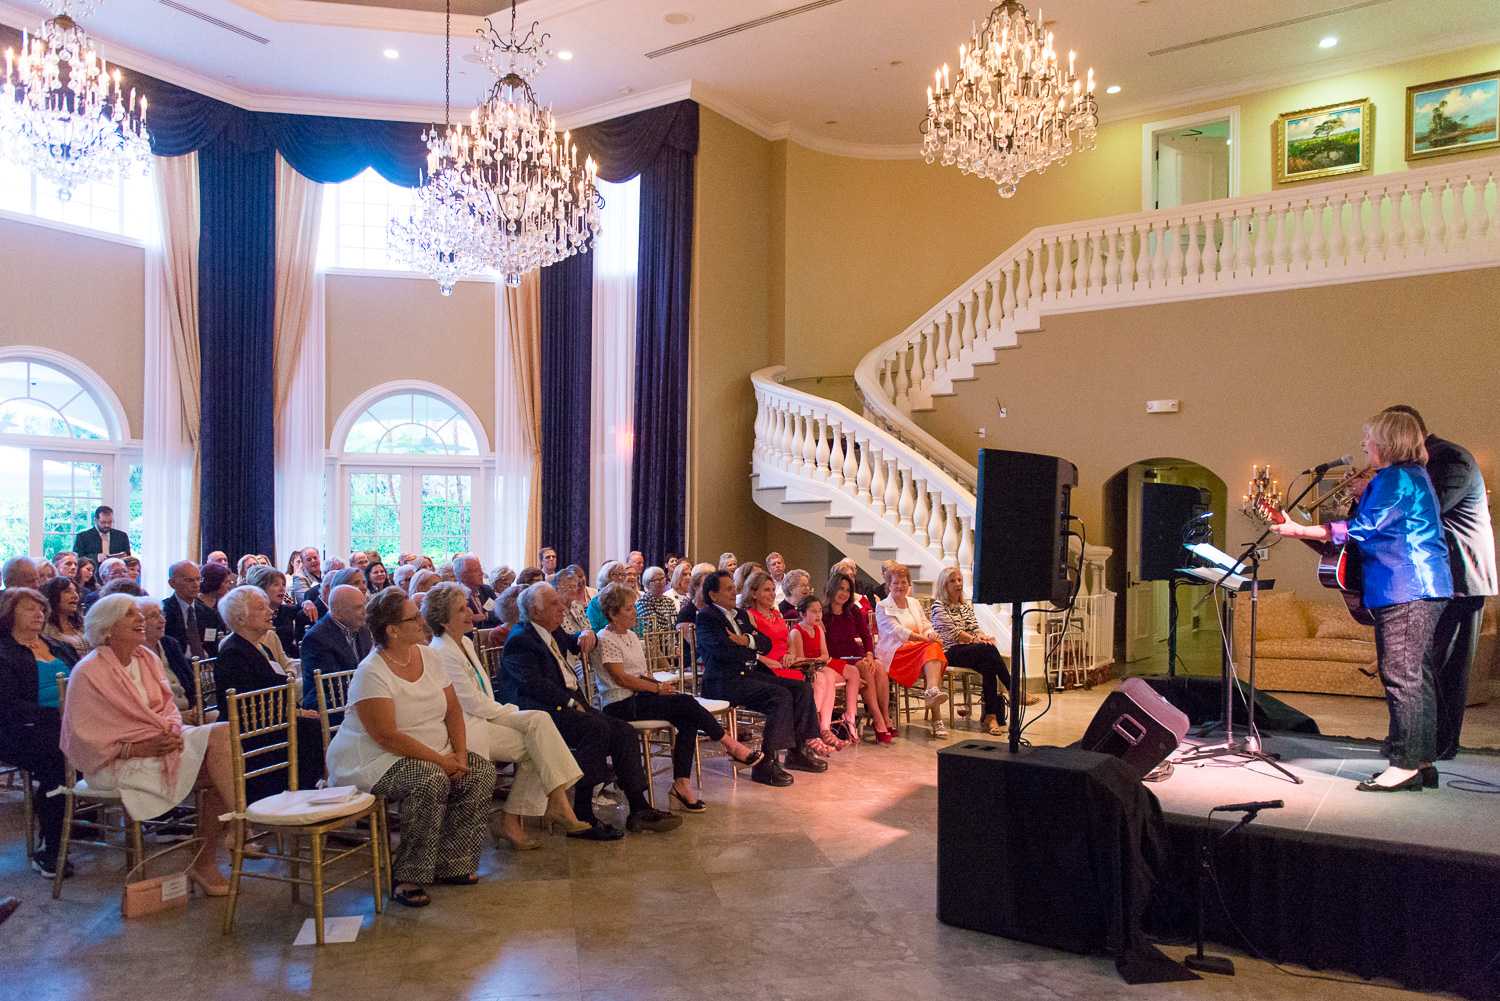 A crowd of about 85 people came to the Baldwin House to watch Elisabeth von Trapp perform. Max Jackson | Photo Editor